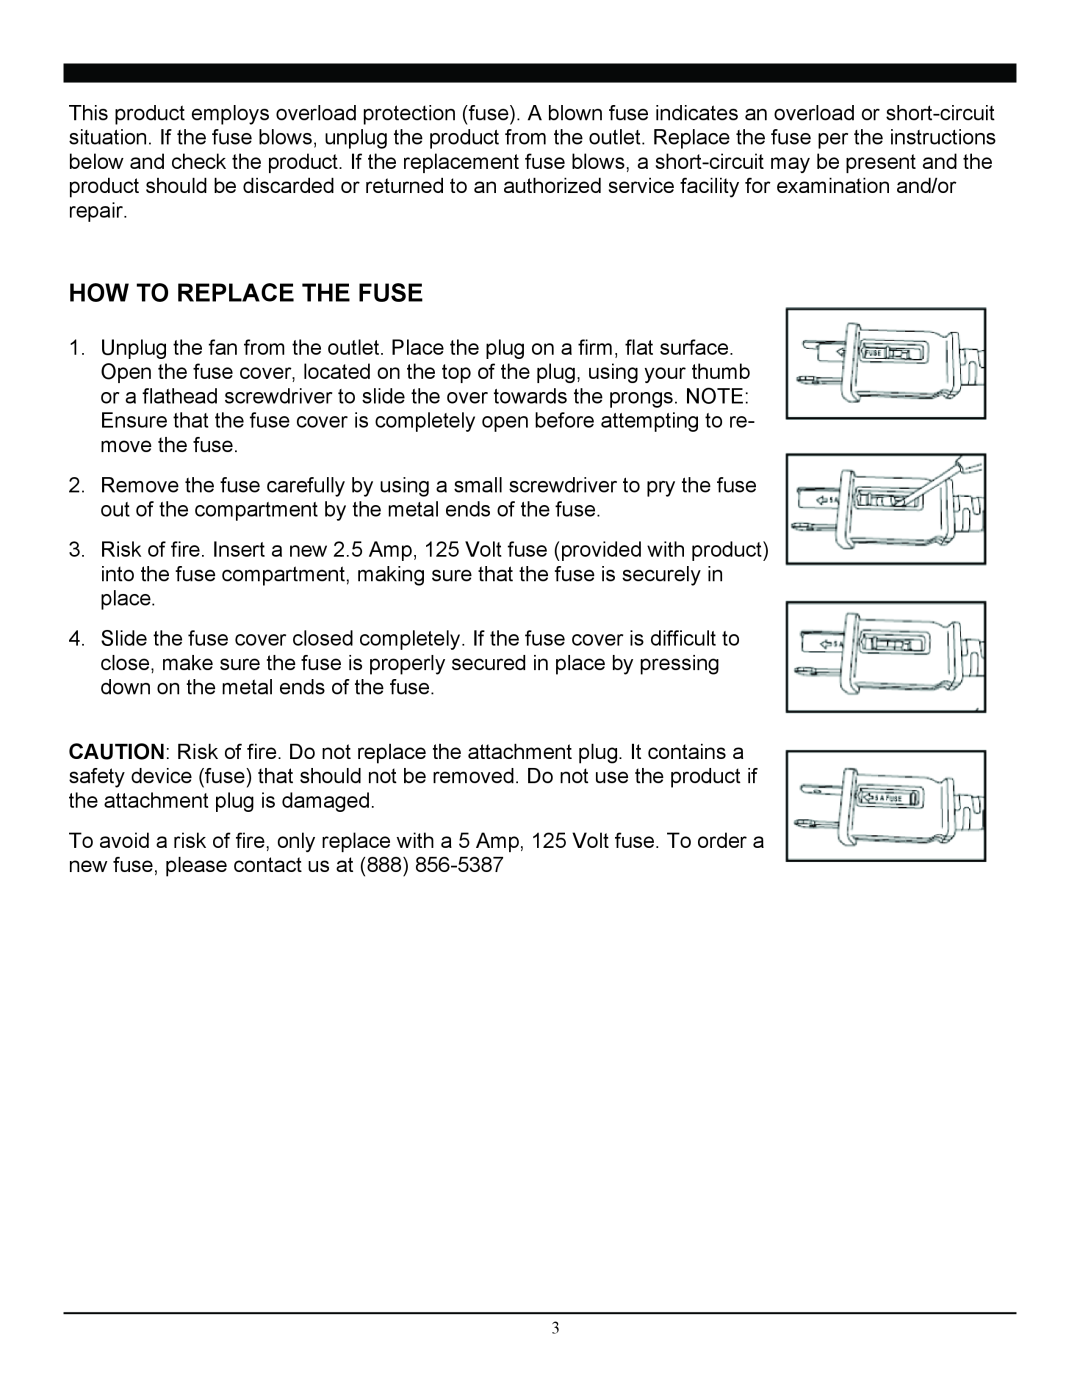 Soleus Air ft2-25-03 operating instructions How To Replace The Fuse 